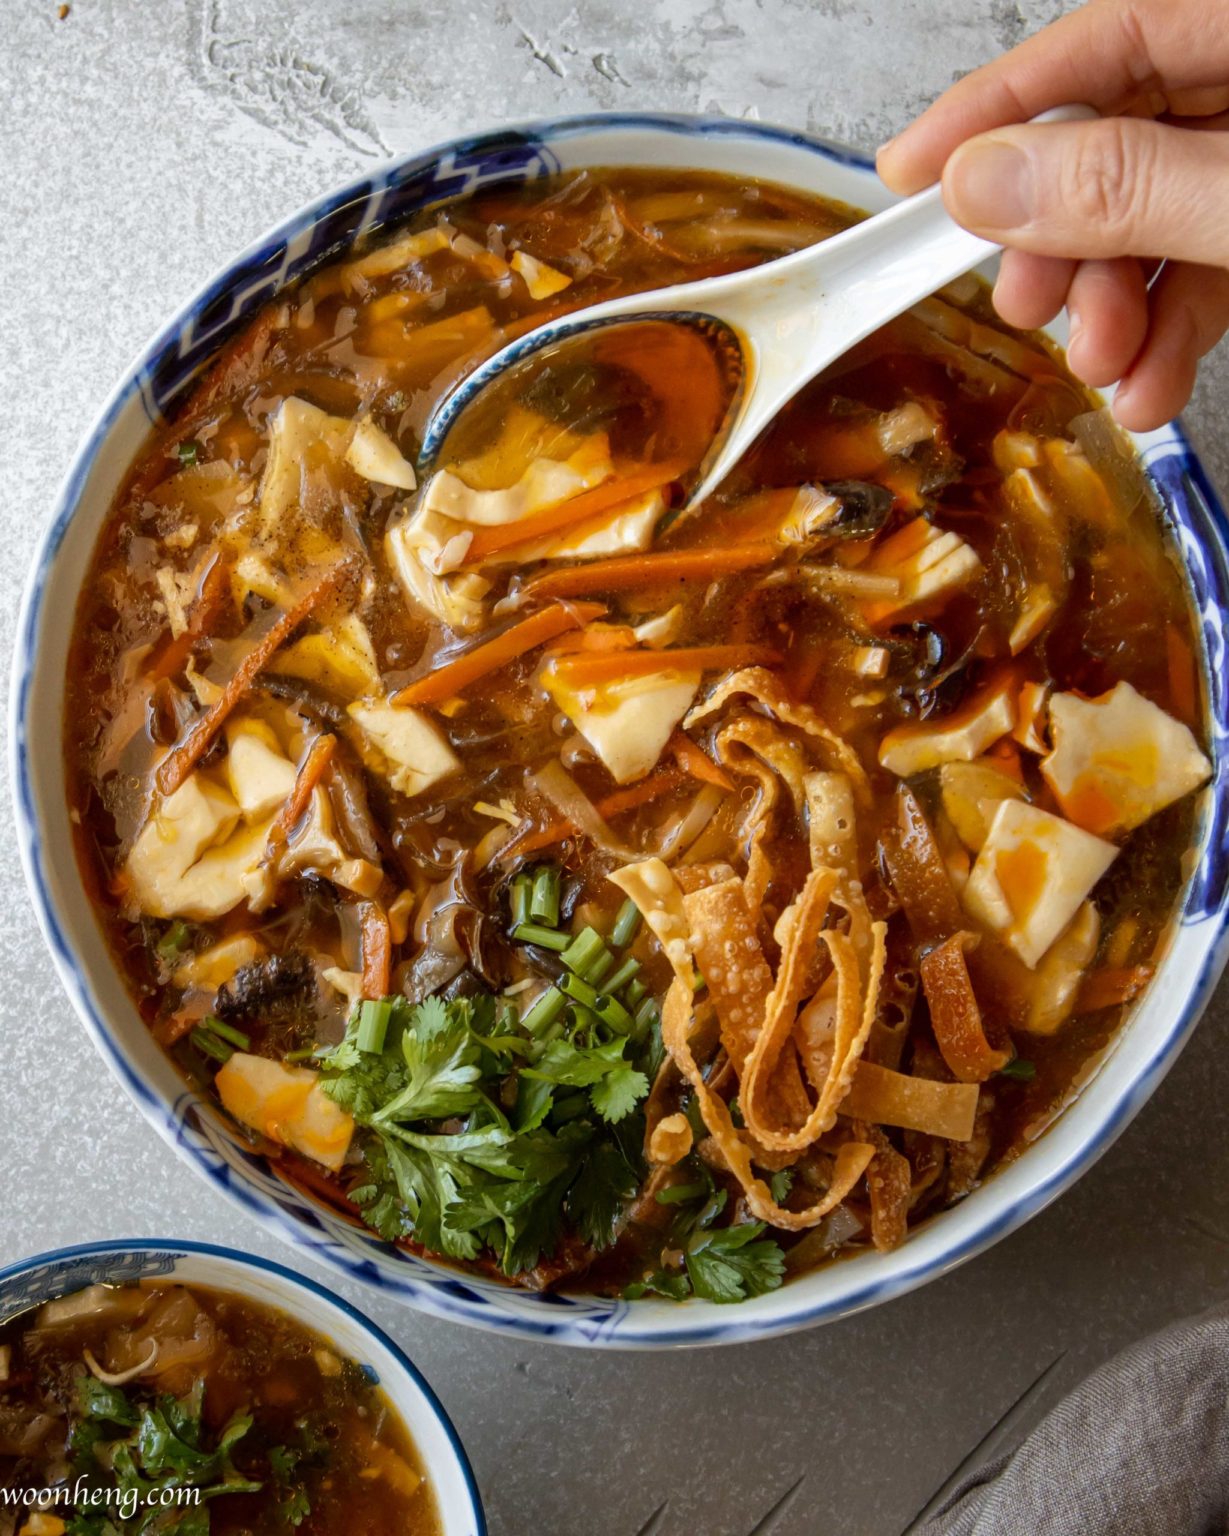 The Best Vegan Hot and Sour soup (Easy step-by-step) - WoonHeng